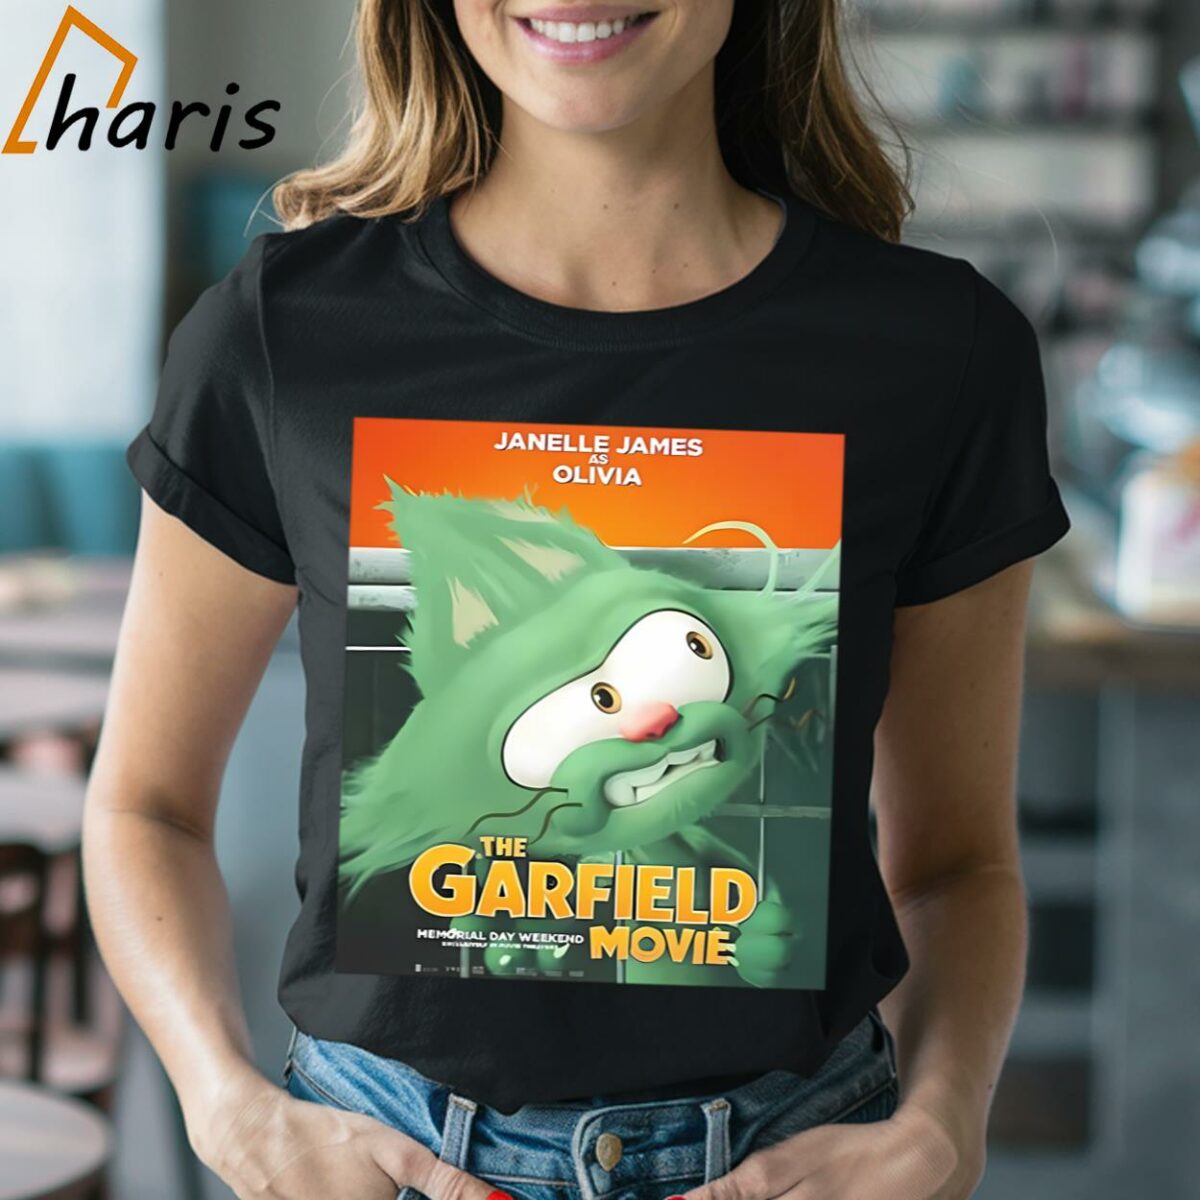 Janelle James As Olivia In The Garfield Movie T Shirt 2 Shirt